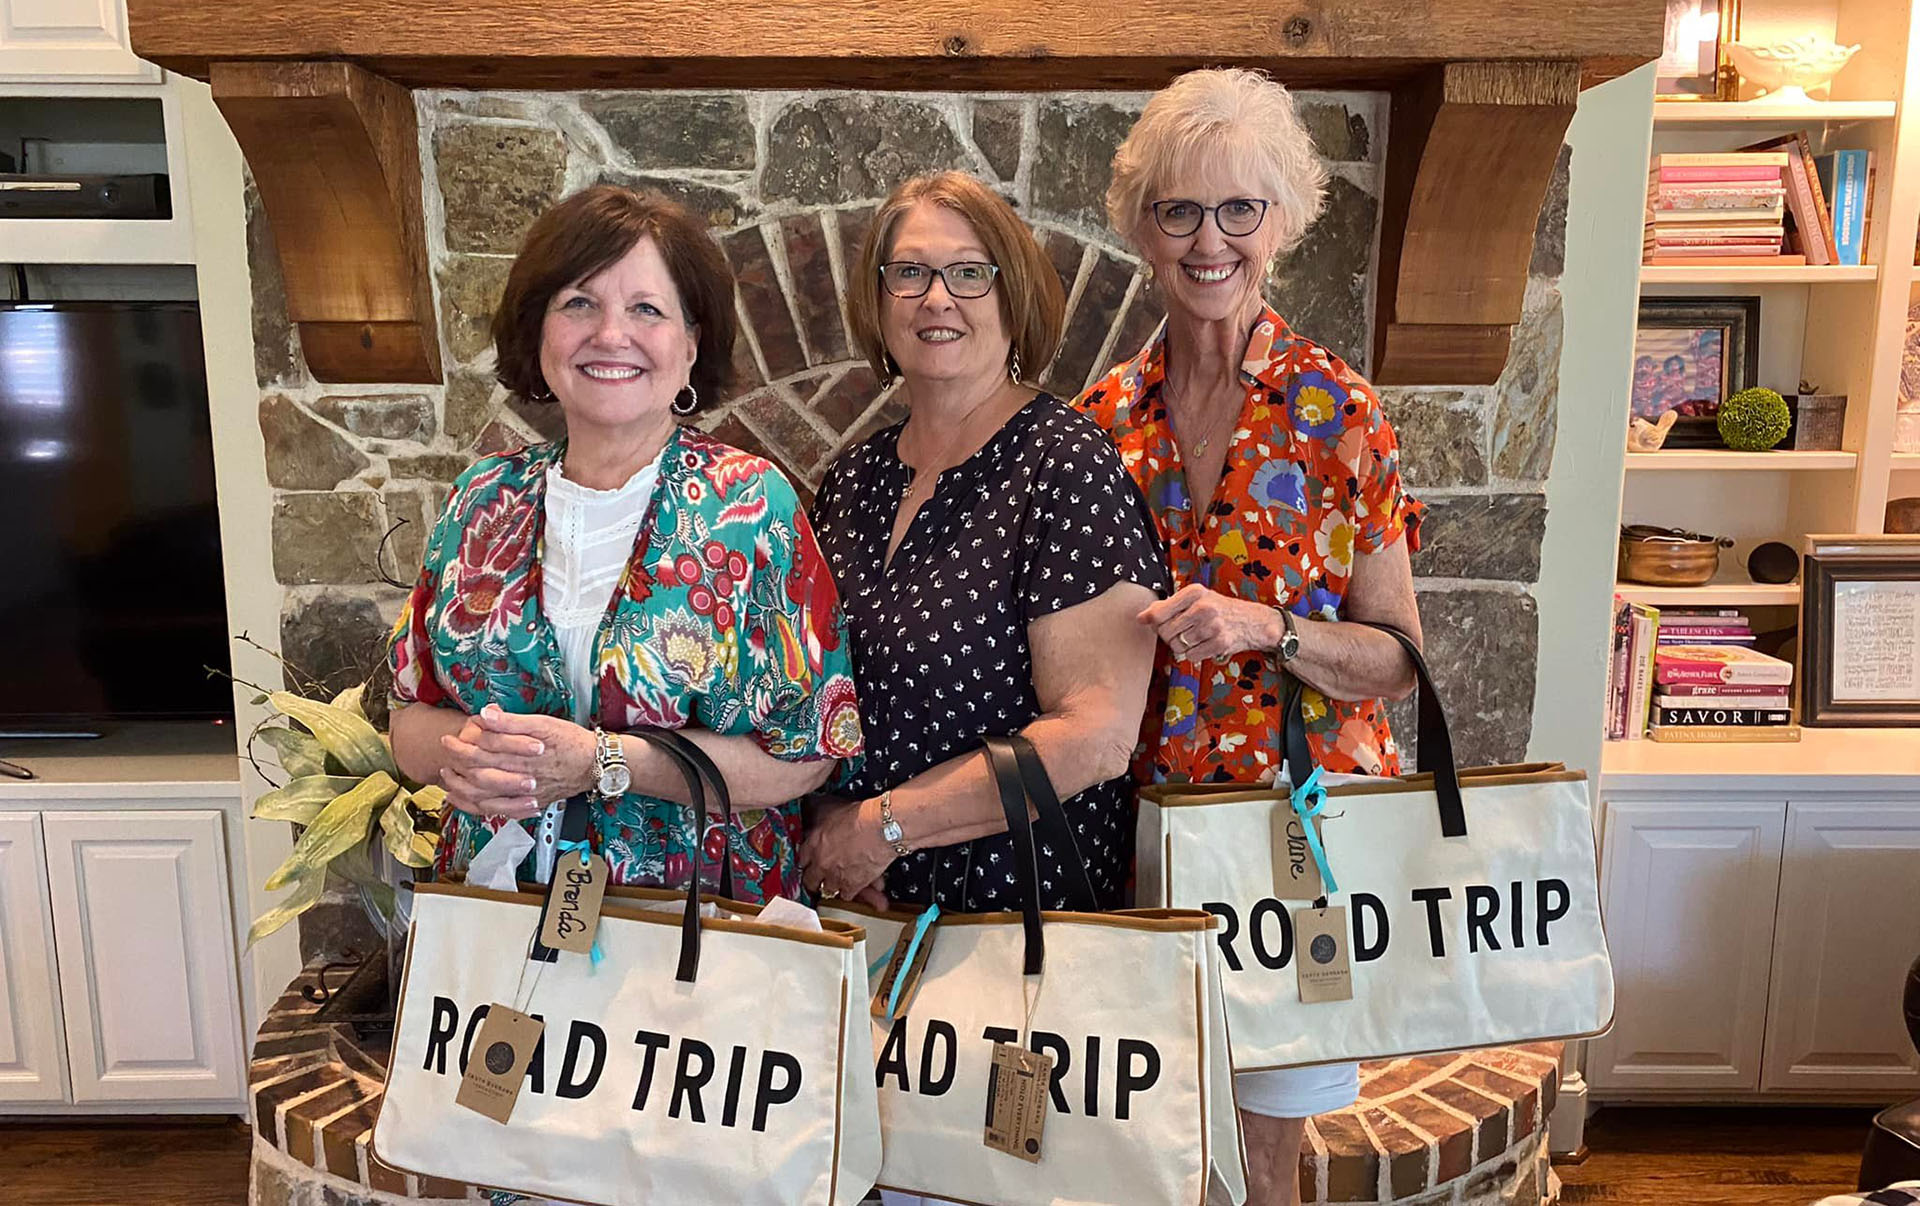 3 Alums with road trip bags on posing